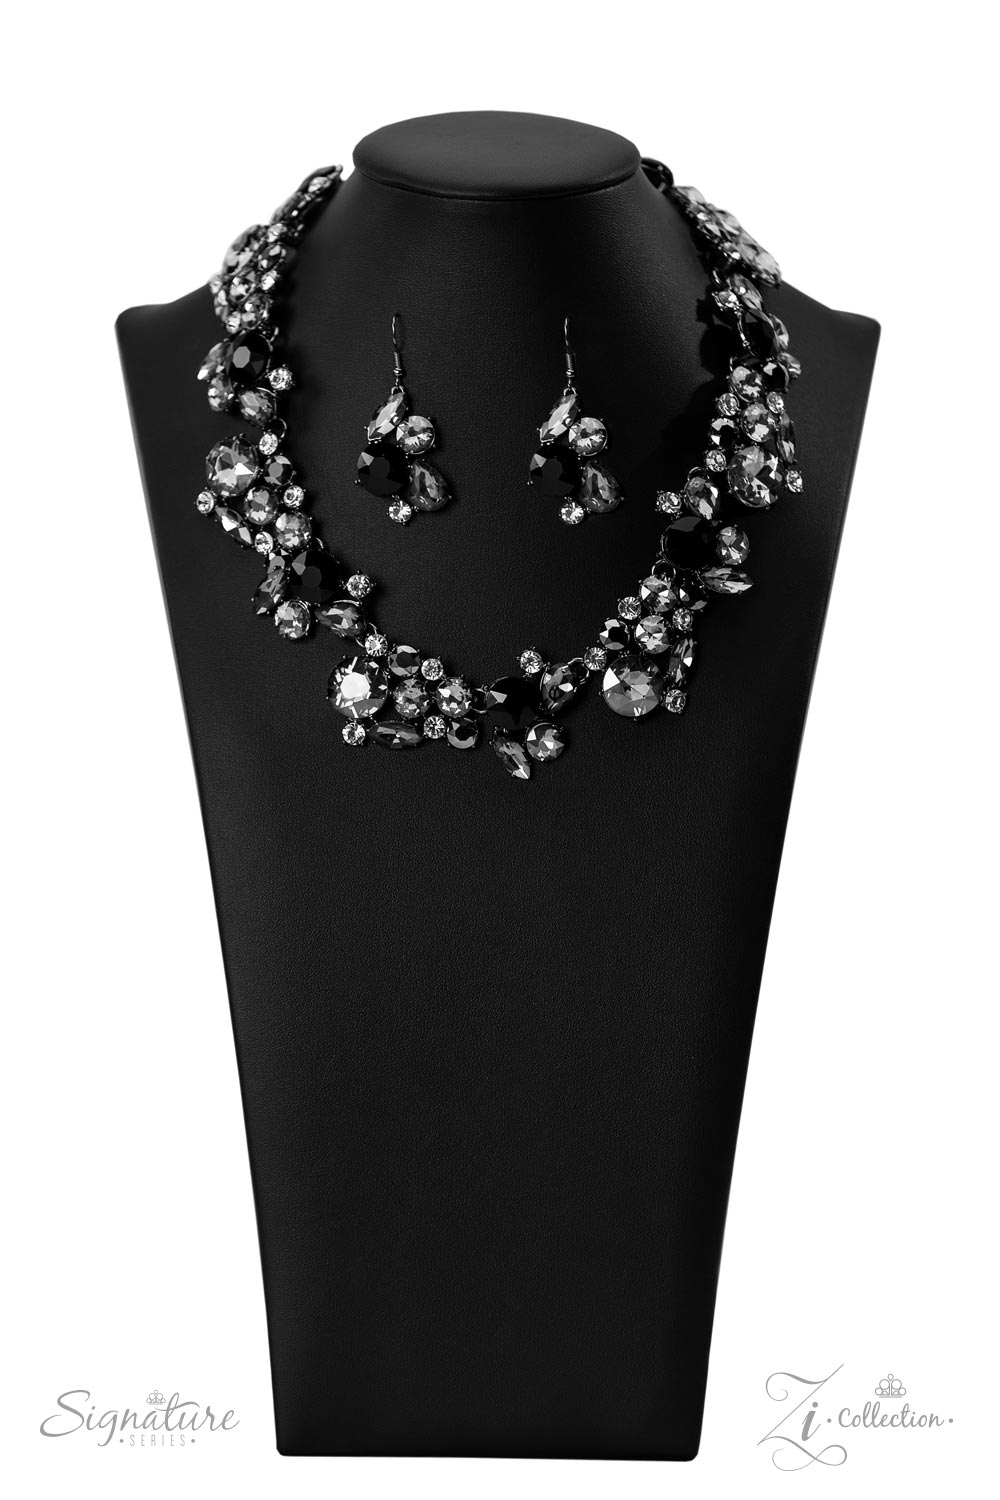 The Kim - Zi Collection - Paparazzi necklace